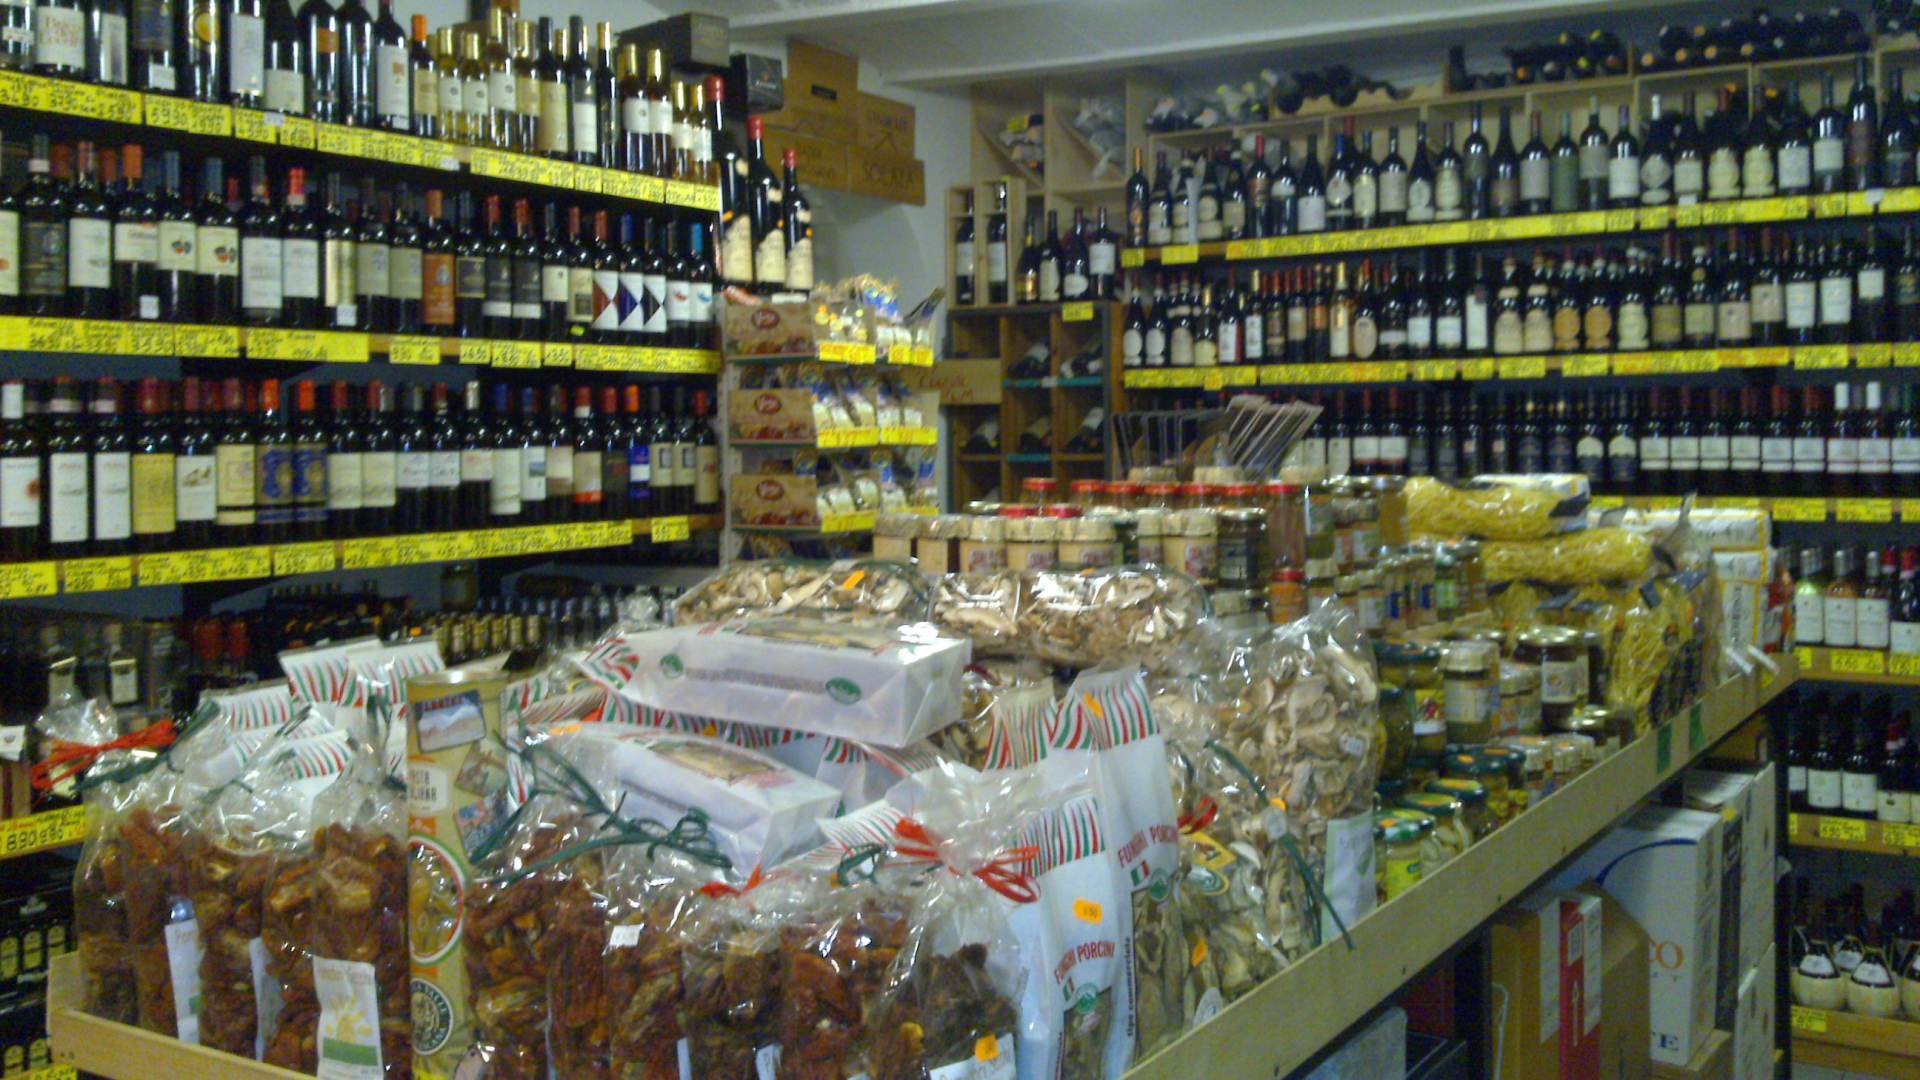 The Menini shop offers a wide range of specialties of food, wines, spirits in the center of Lazise Lake Garda.